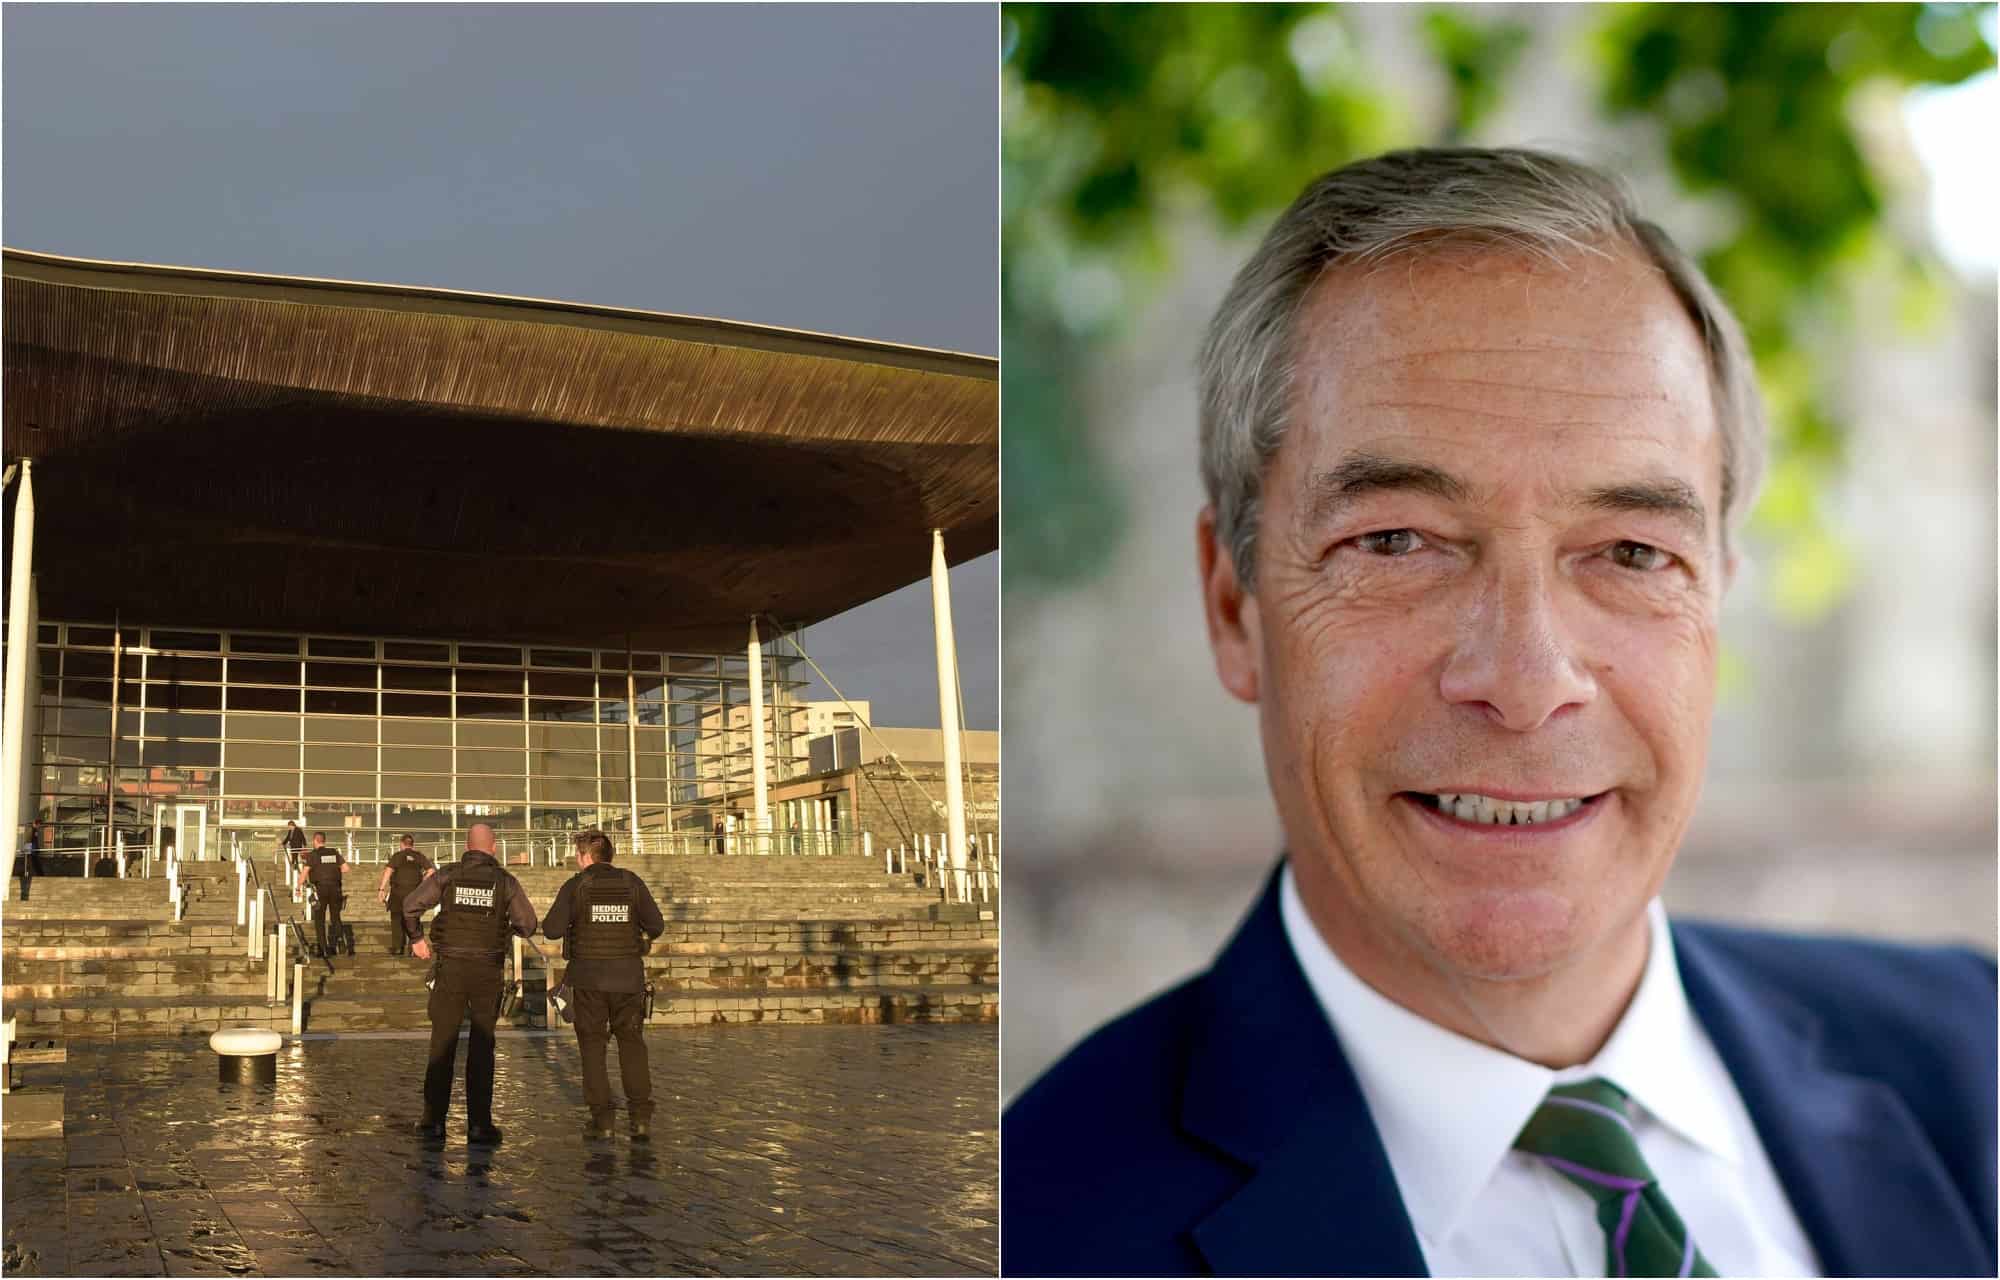 GB News removed from Senedd televisions